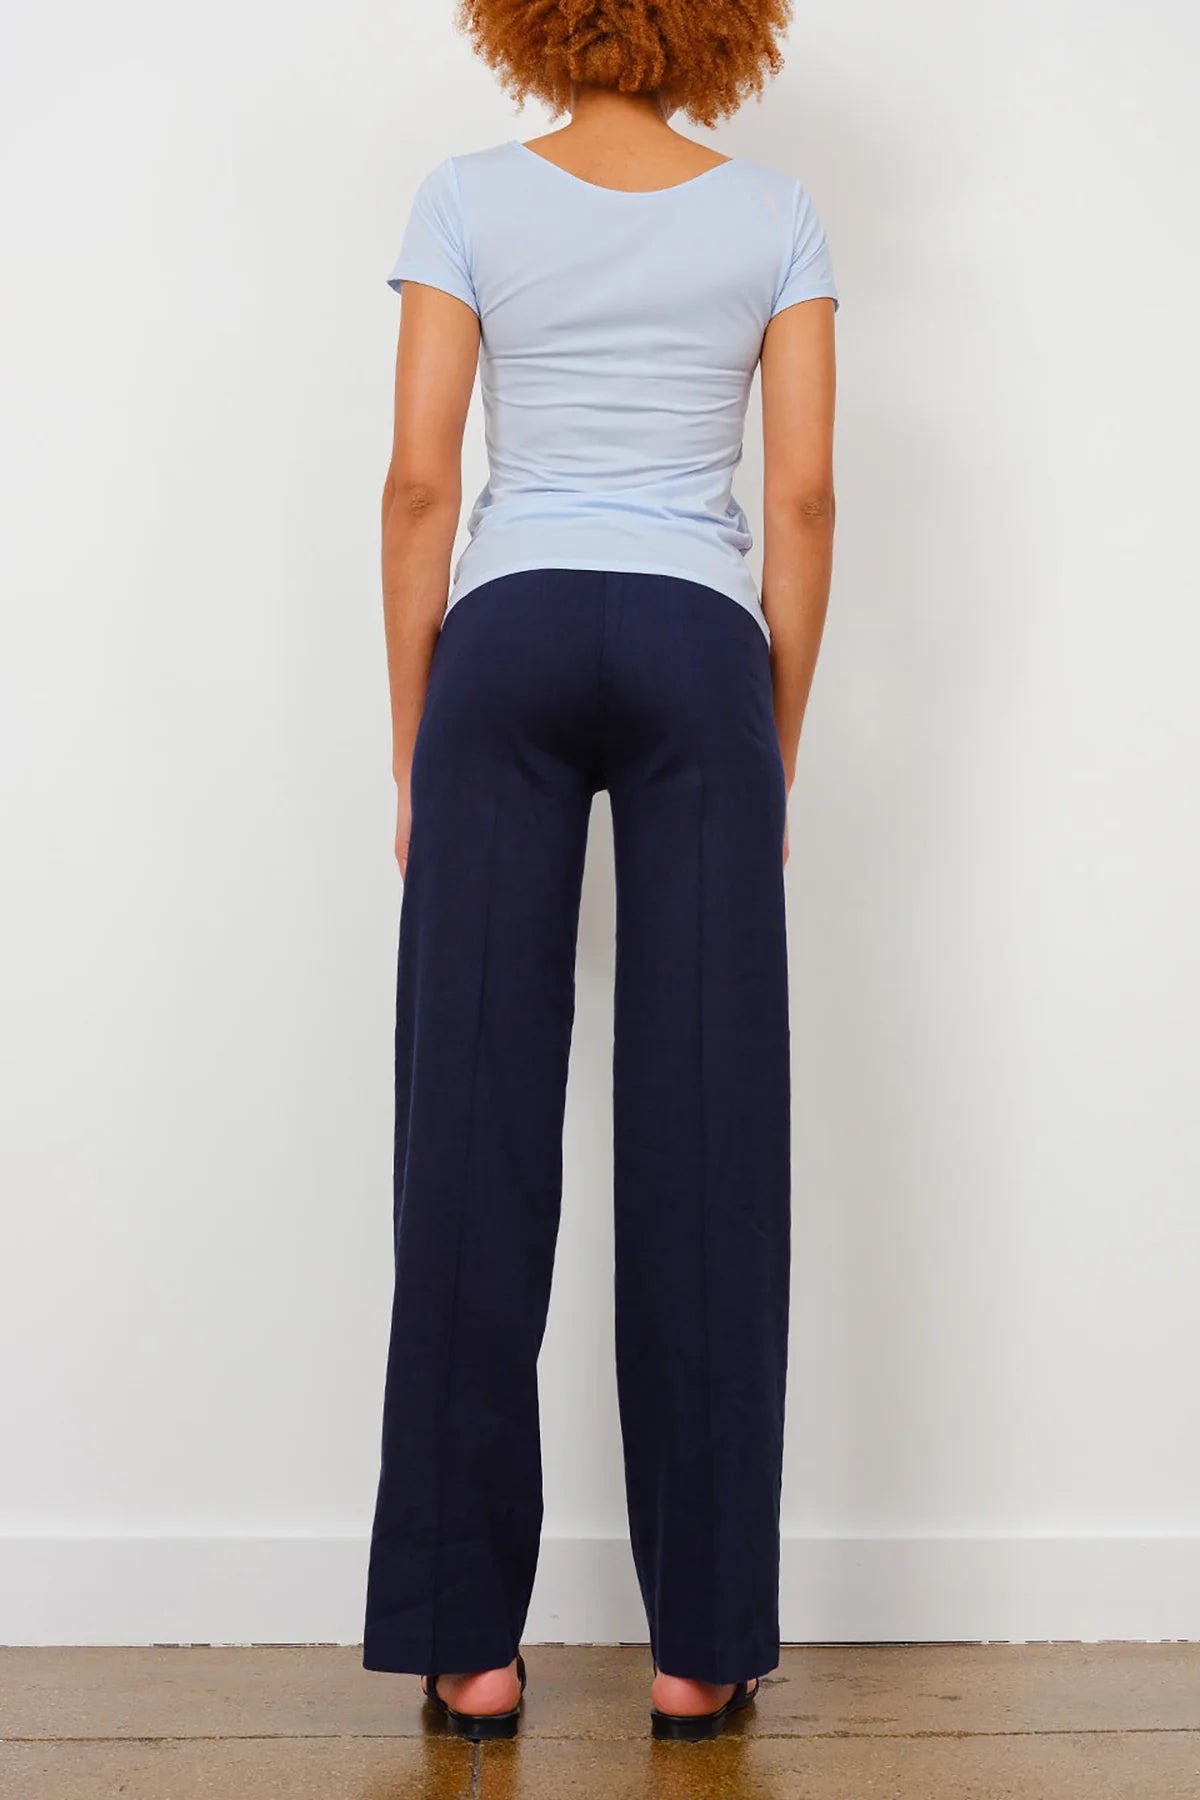 FLAVIA LINEN PANT IN NAVY - Romi Boutique